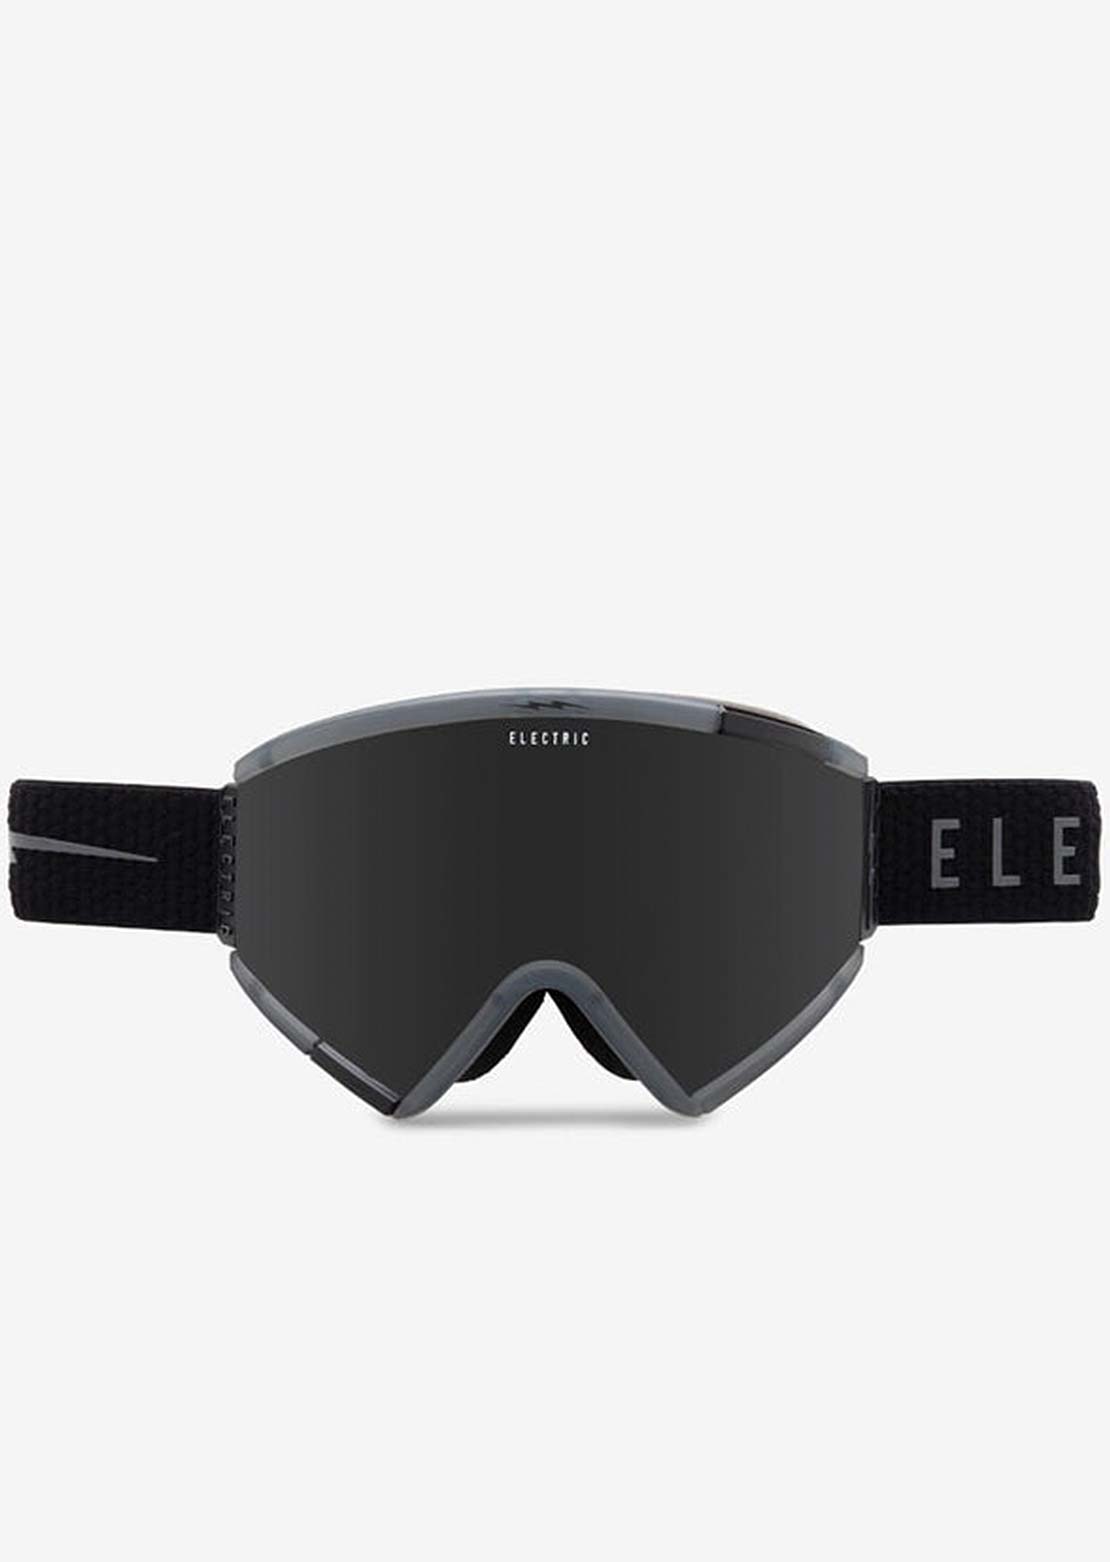 Electric Roteck Snow Goggles Matte Stealth Black/Onyx